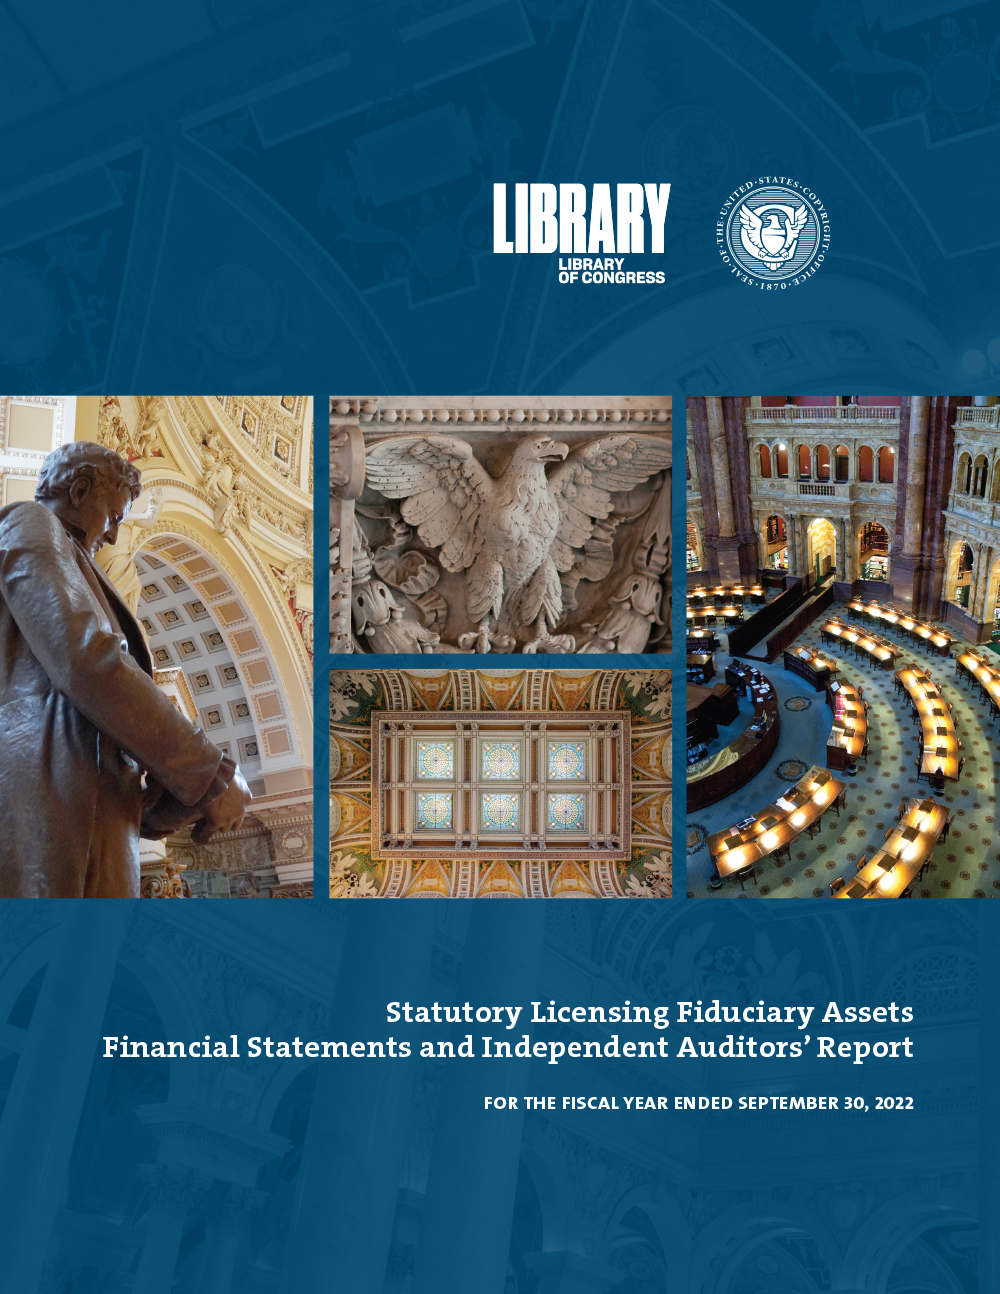 Statutory Licensing Fiduciary Assets Audited Financial Statements Report cover